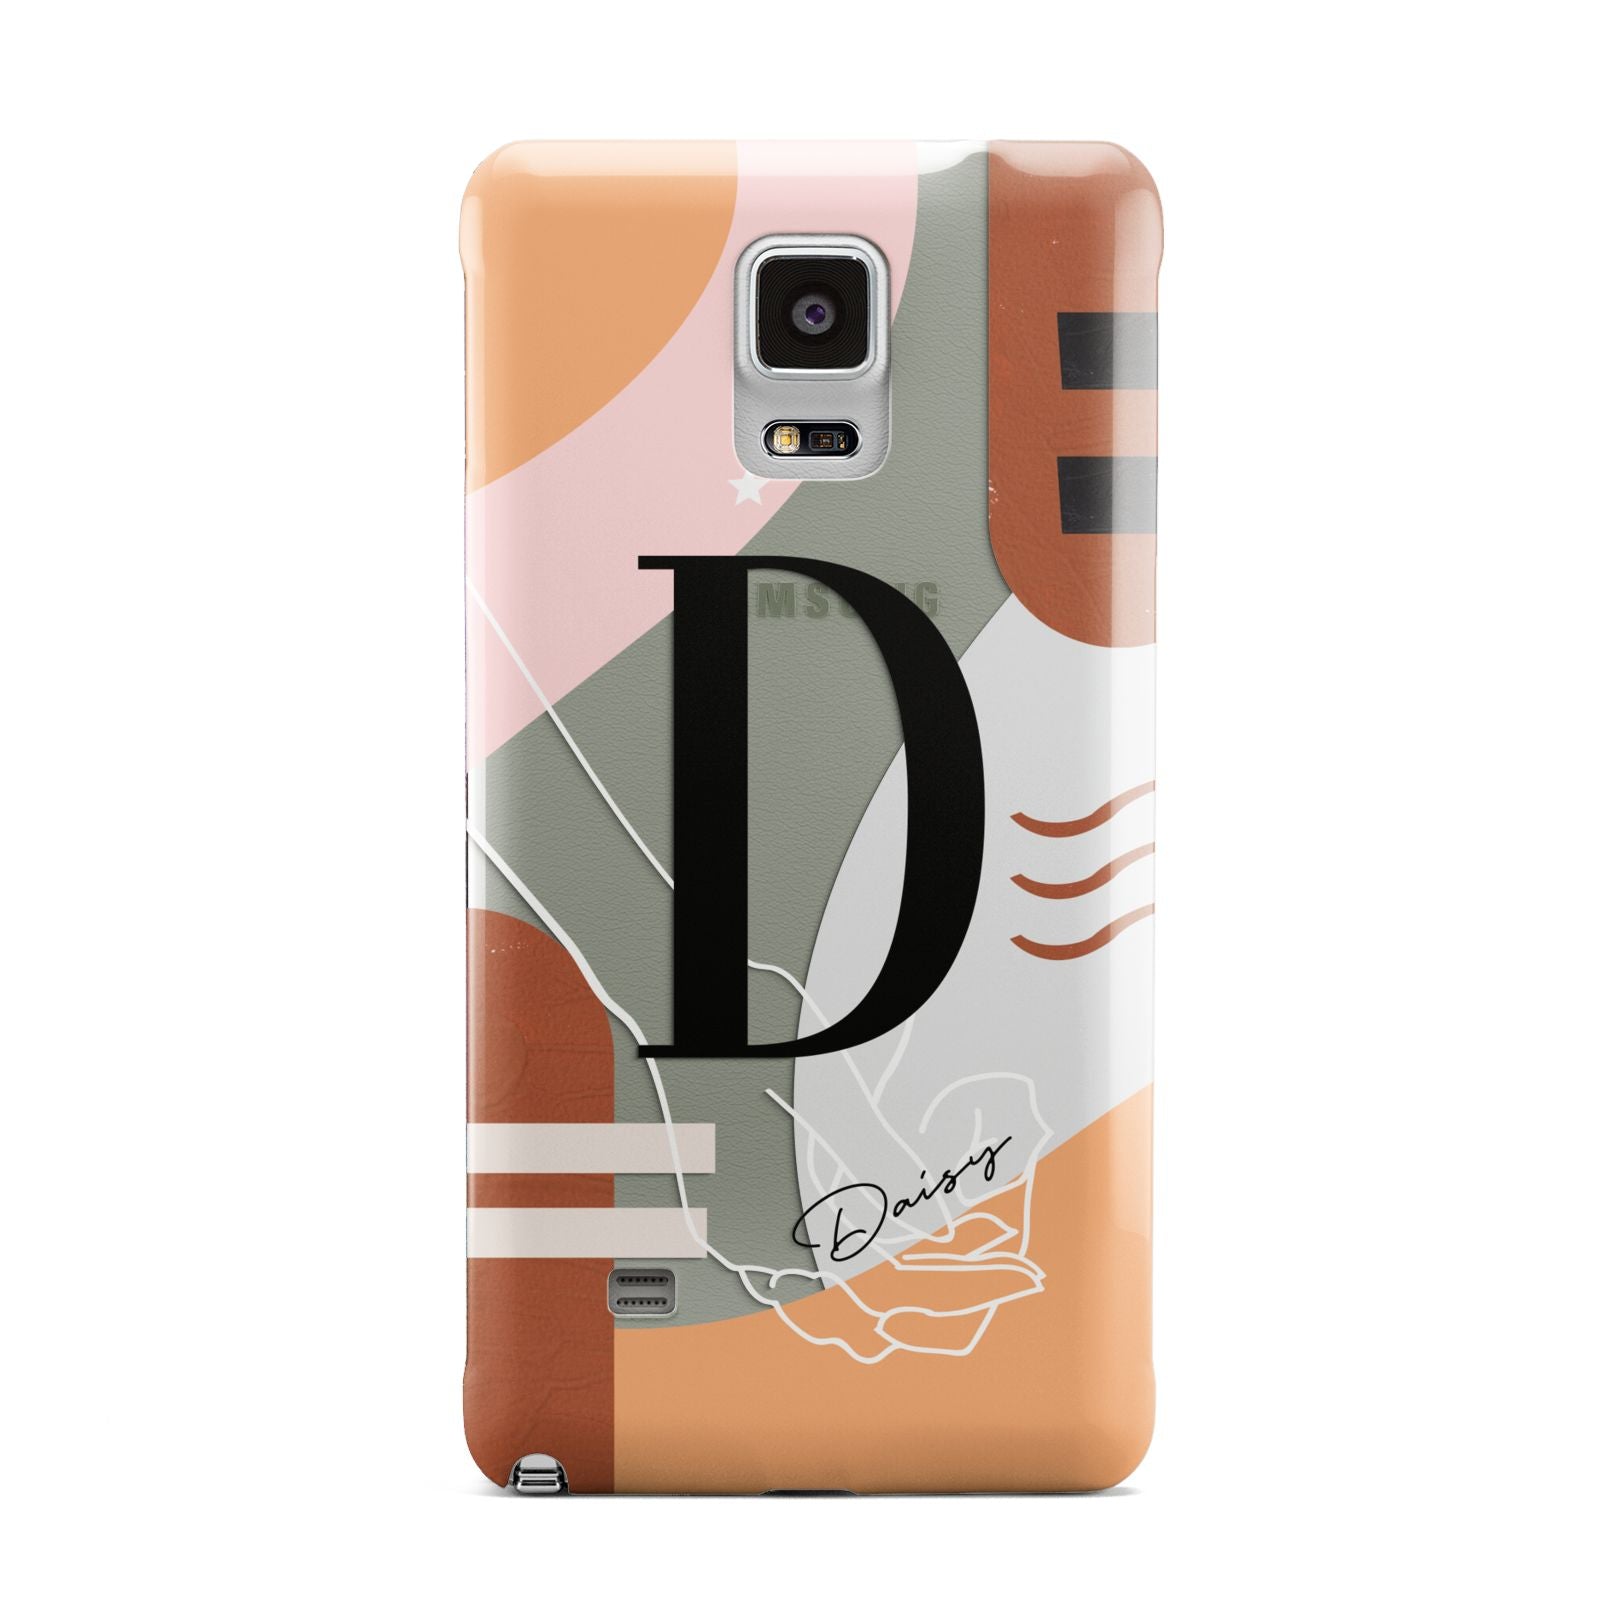 Personalised Abstract Samsung Galaxy Note 4 Case